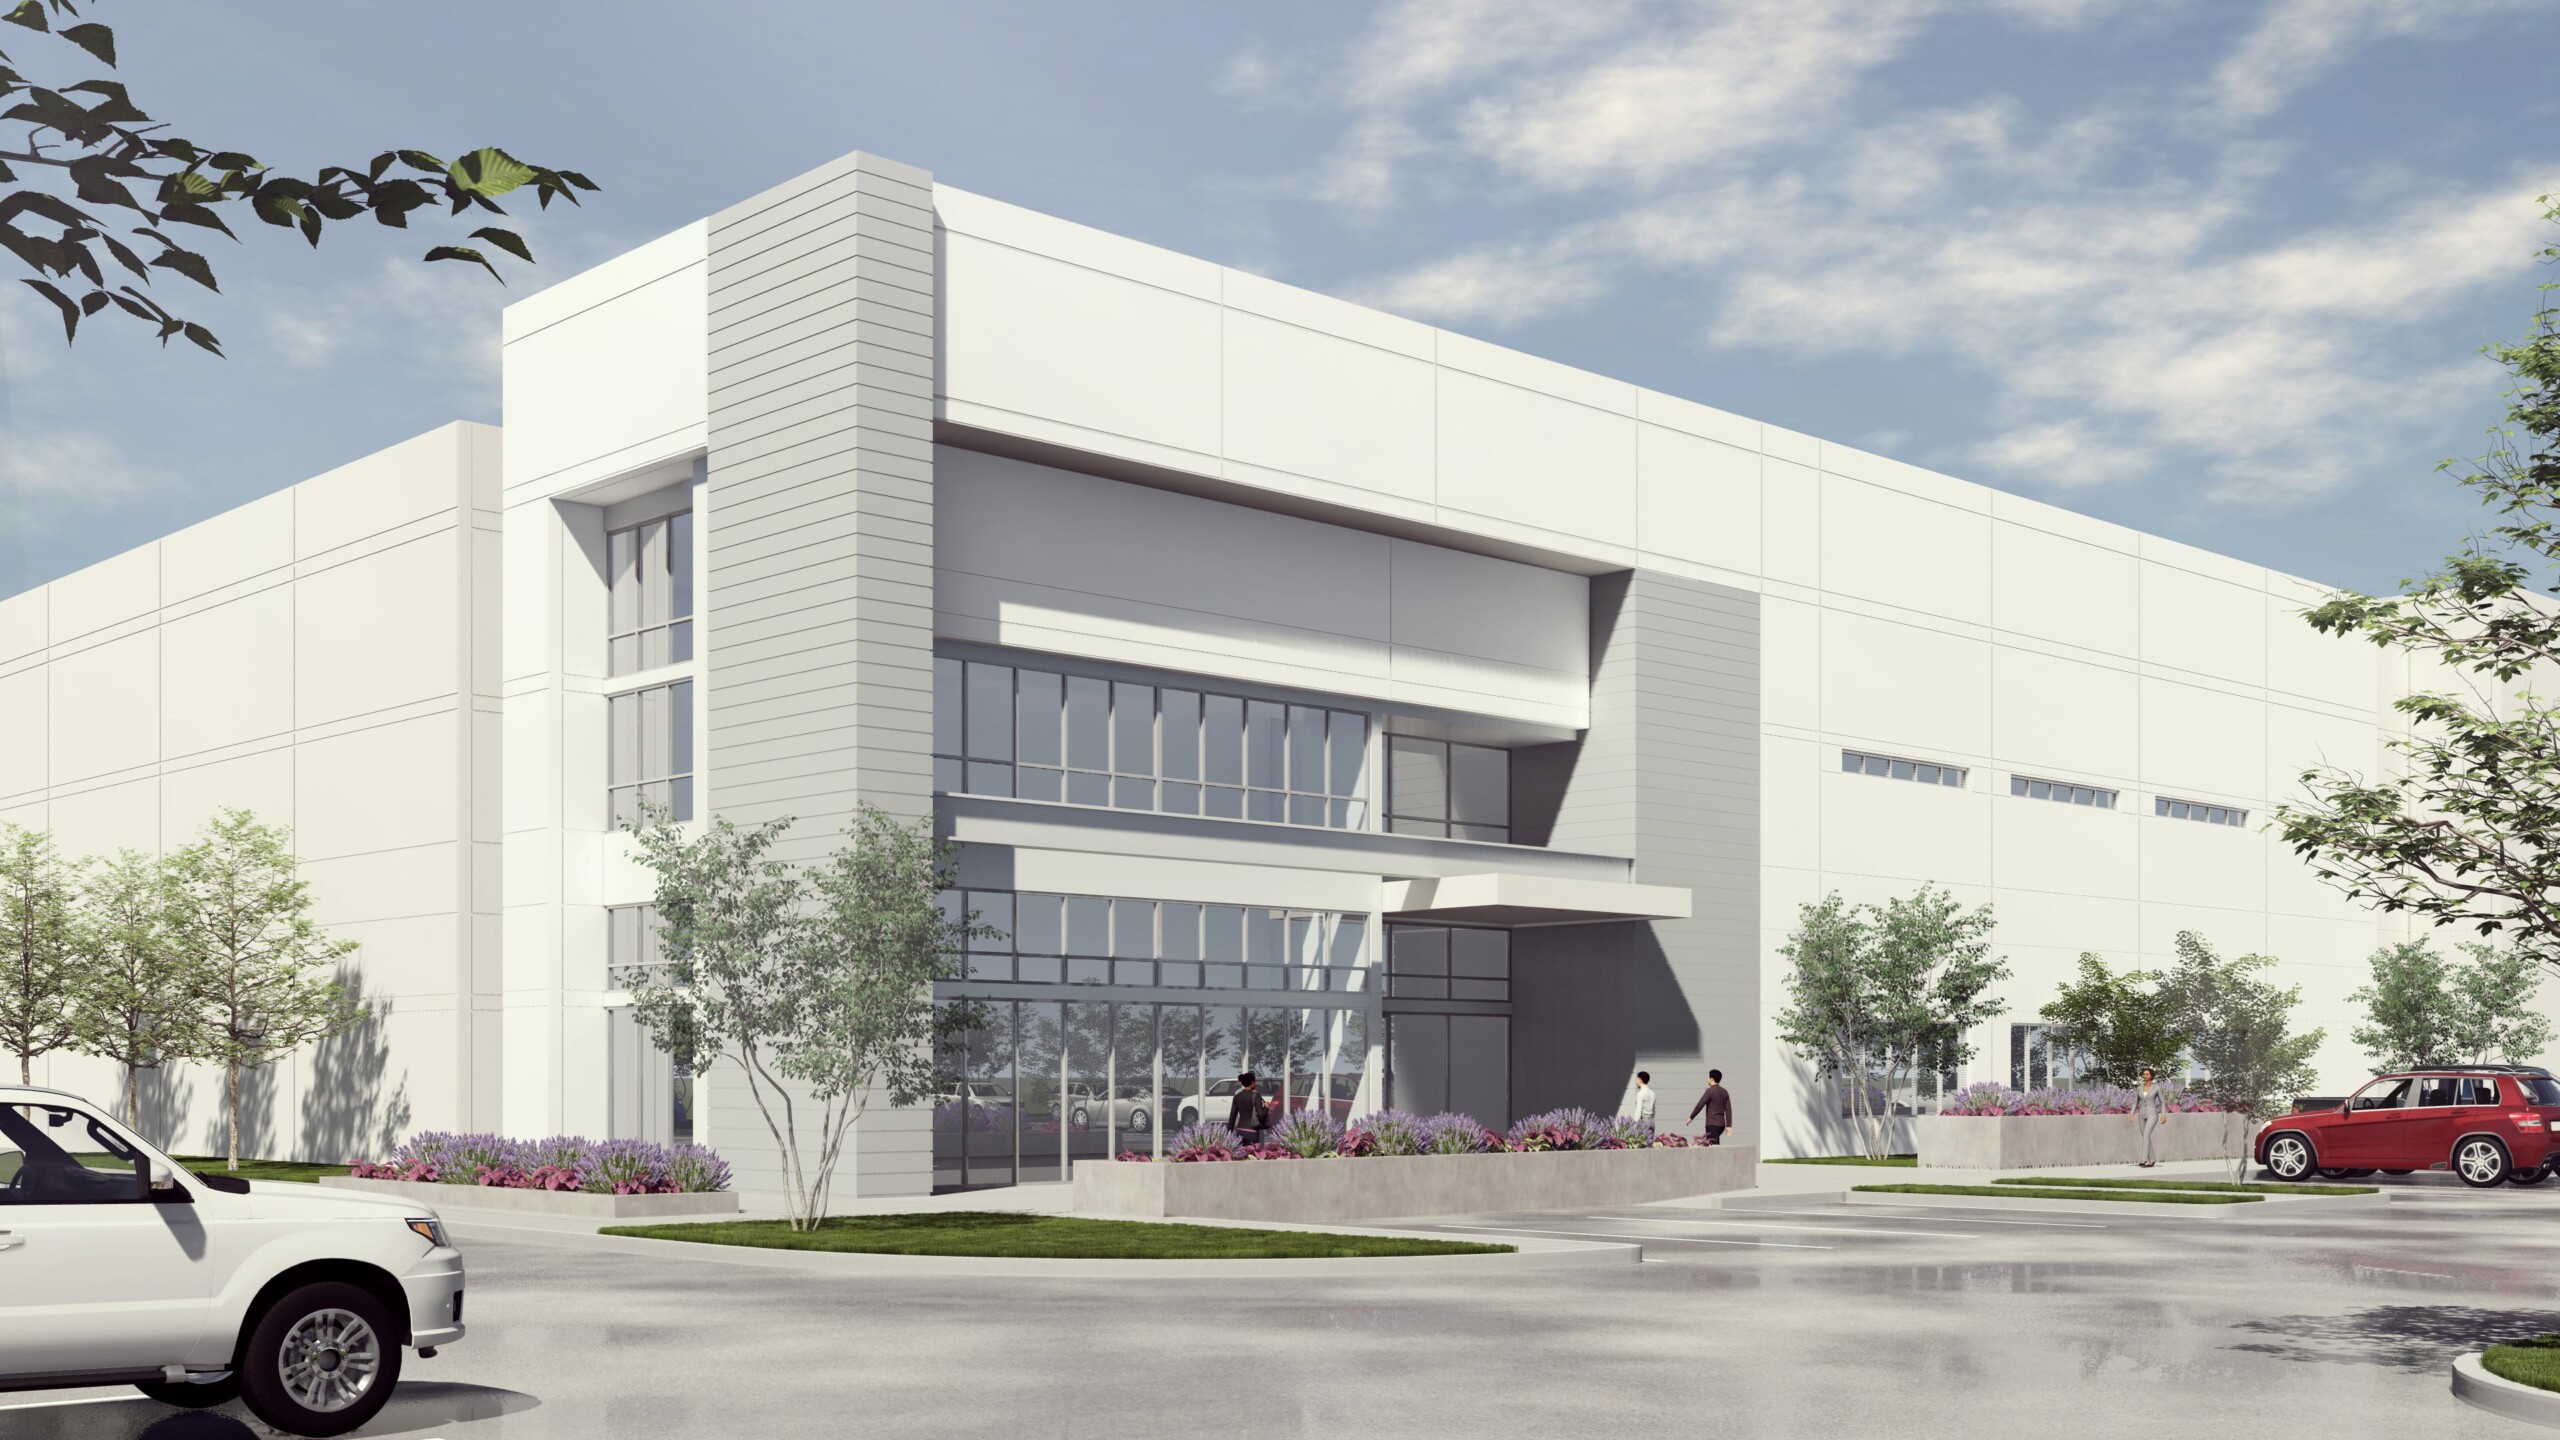 hillwood-developing-1-7-million-square-feet-of-new-industrial-space-d